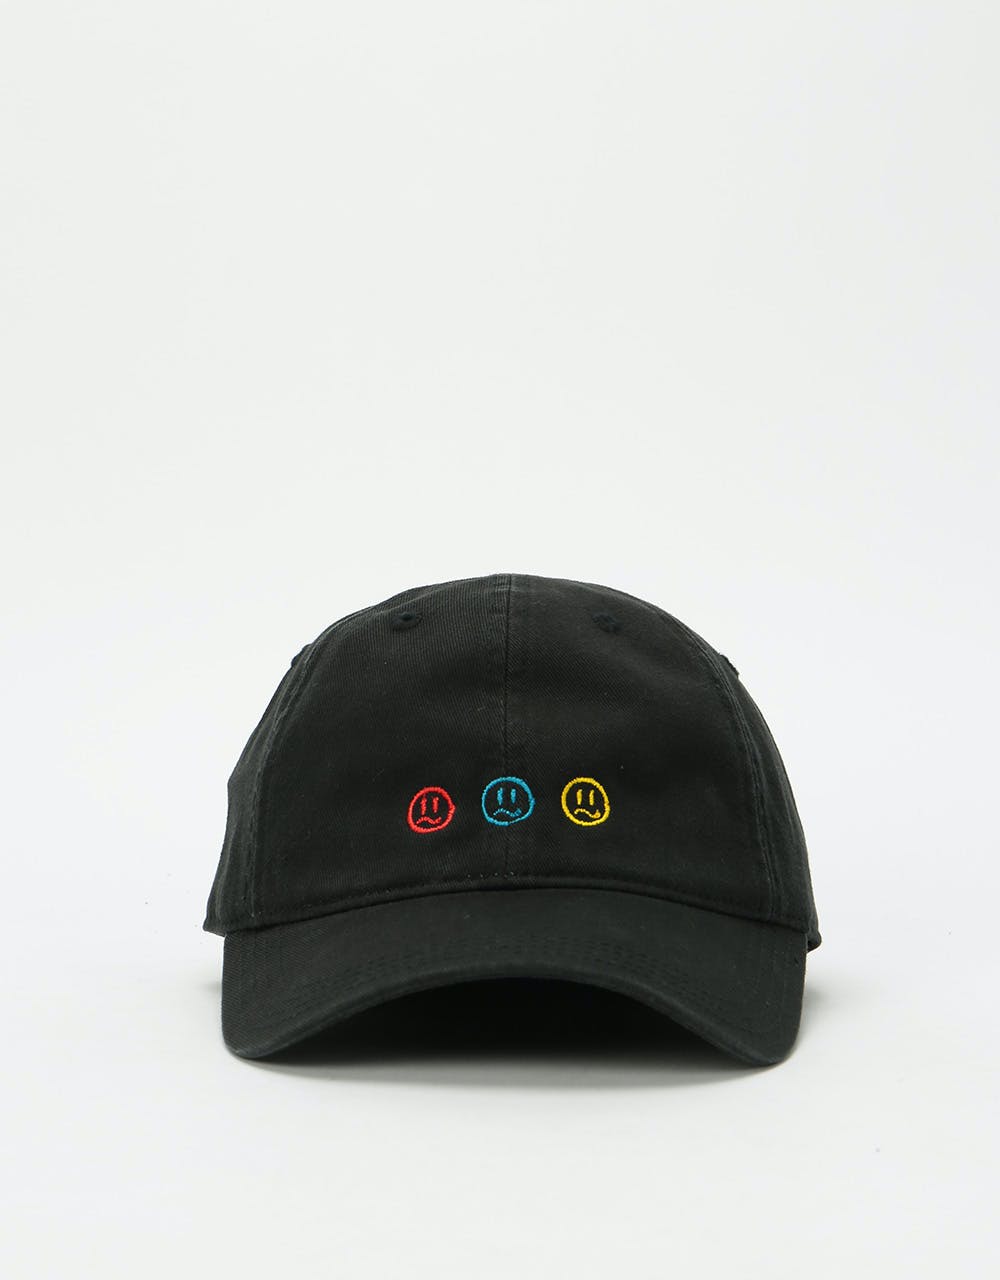 Route One Wonky Cap - Black